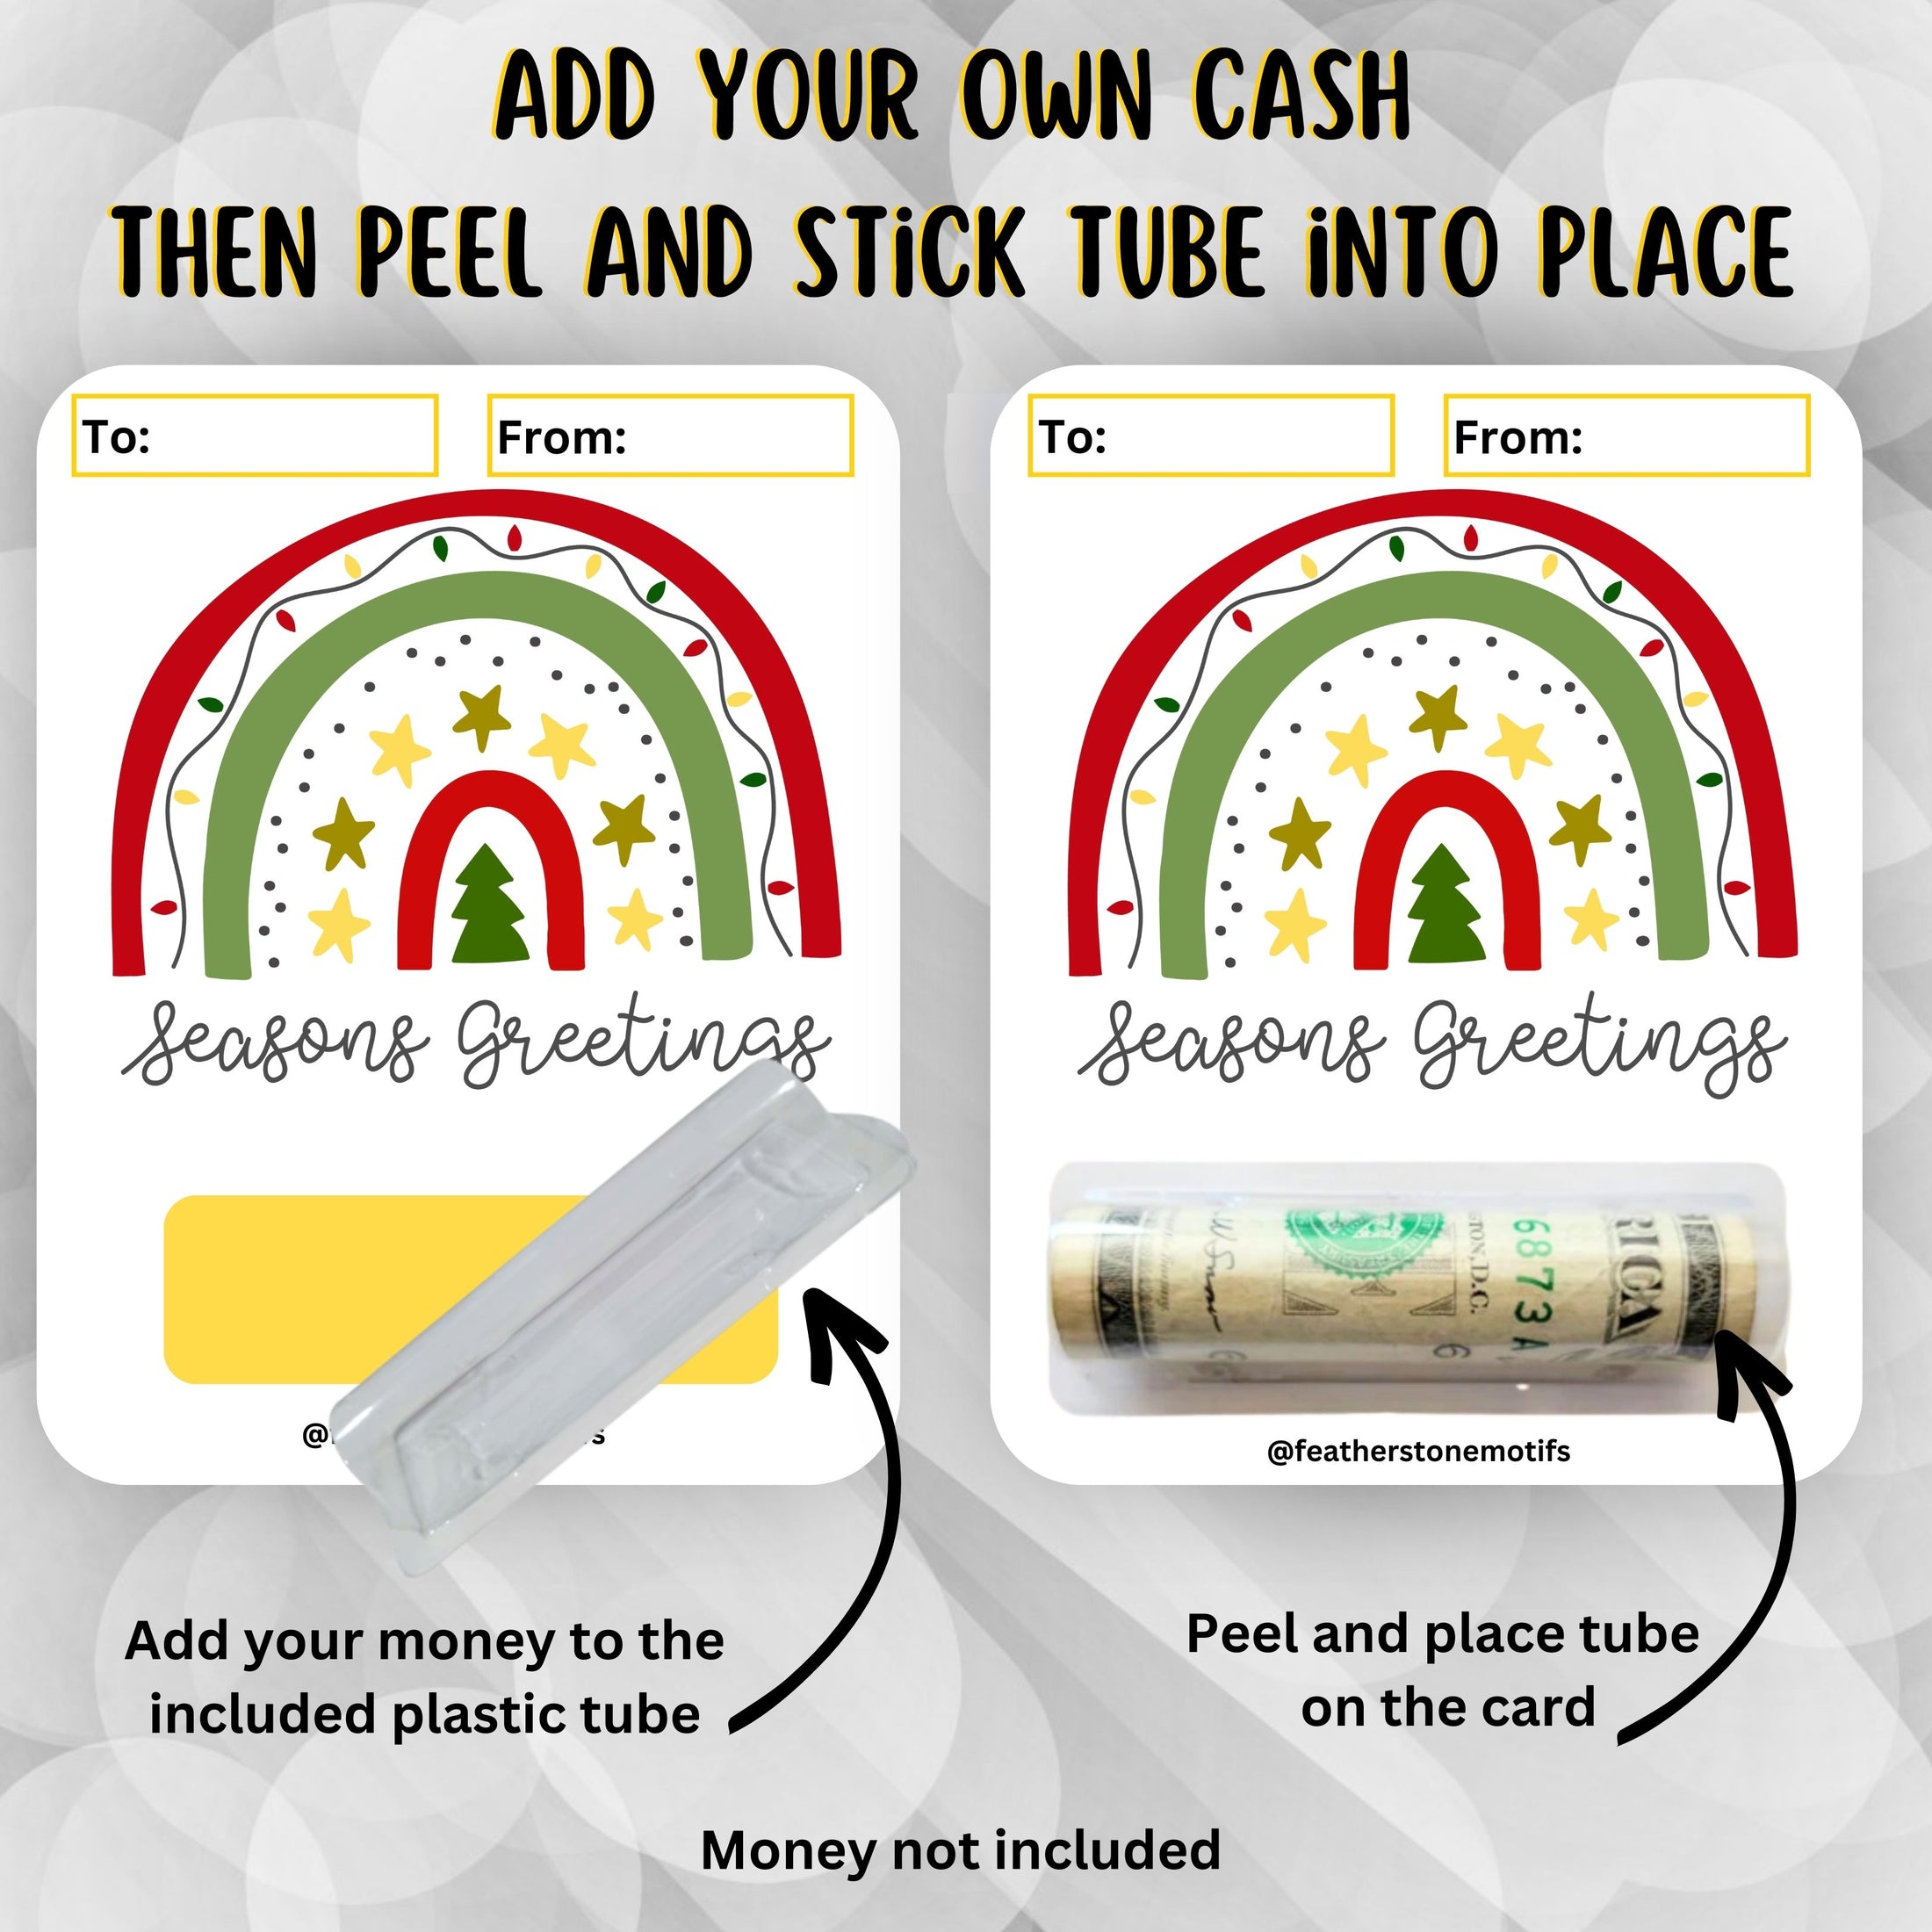 This image shows how to attach the money tube to the Rainbow Greetings money card.